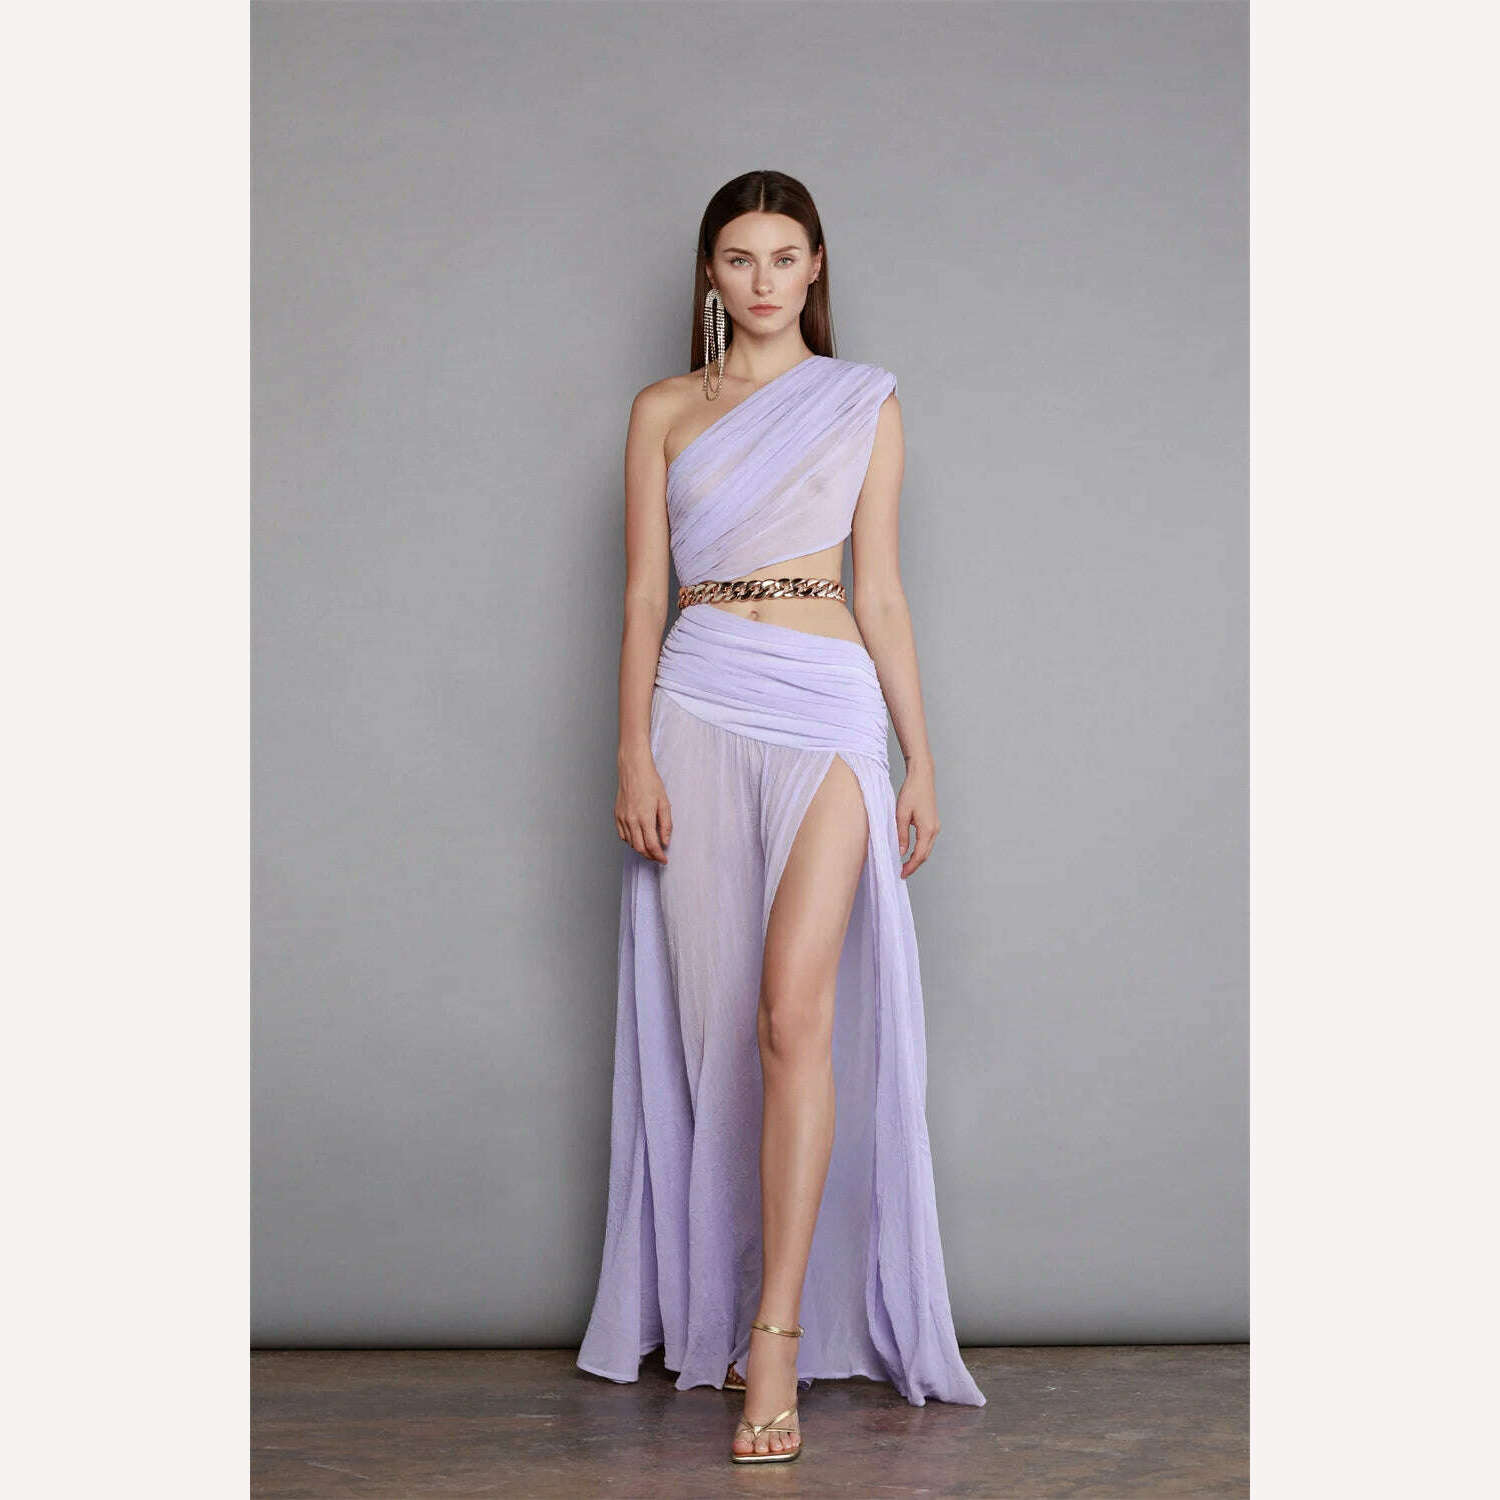 KIMLUD, New Summer Violet Color Sexy One Shoulder Golden Chain EXpose Waist High Split Floor Lenght Dress Celebrity Evening Party Outfit, KIMLUD Women's Clothes